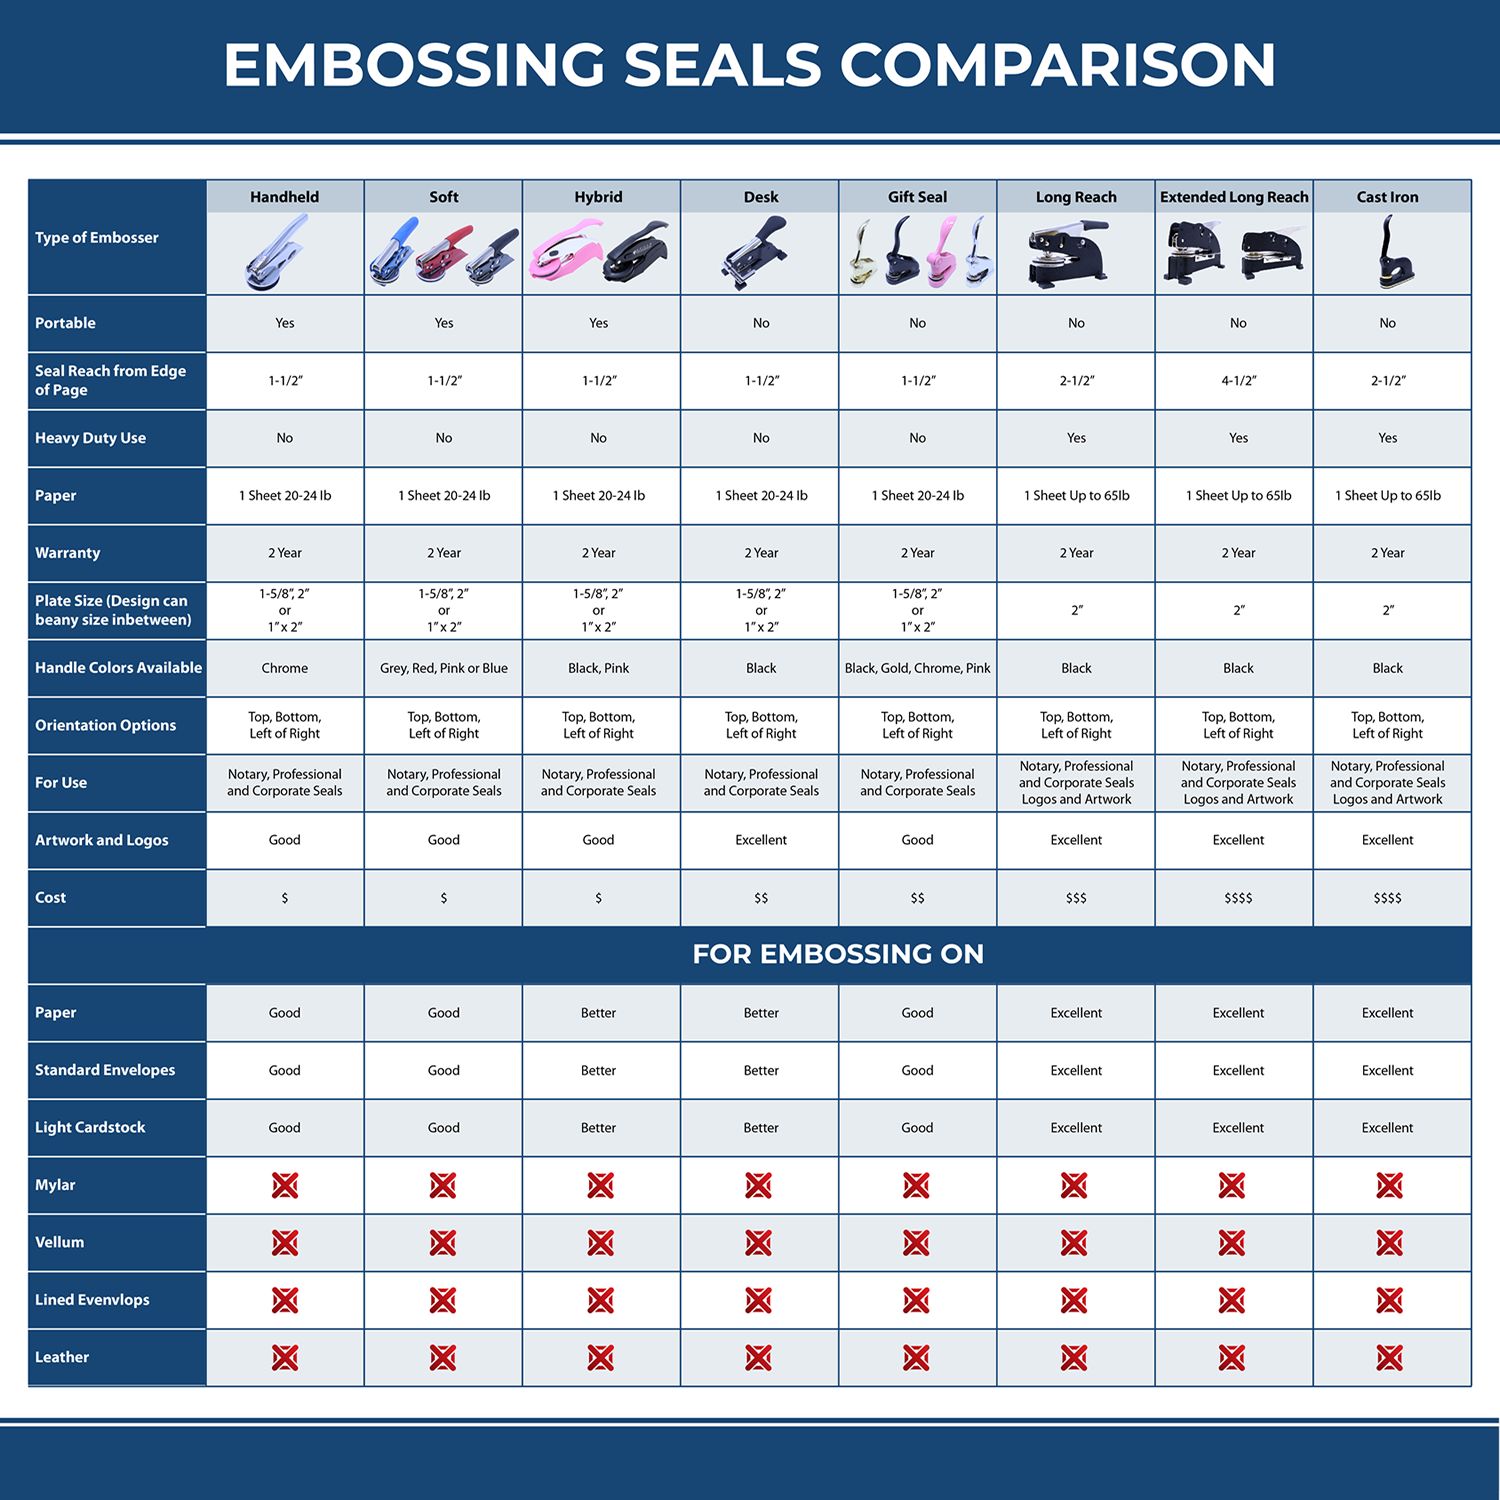 A comparison chart for the different types of mount models available for the Handheld Tennessee Land Surveyor Seal.